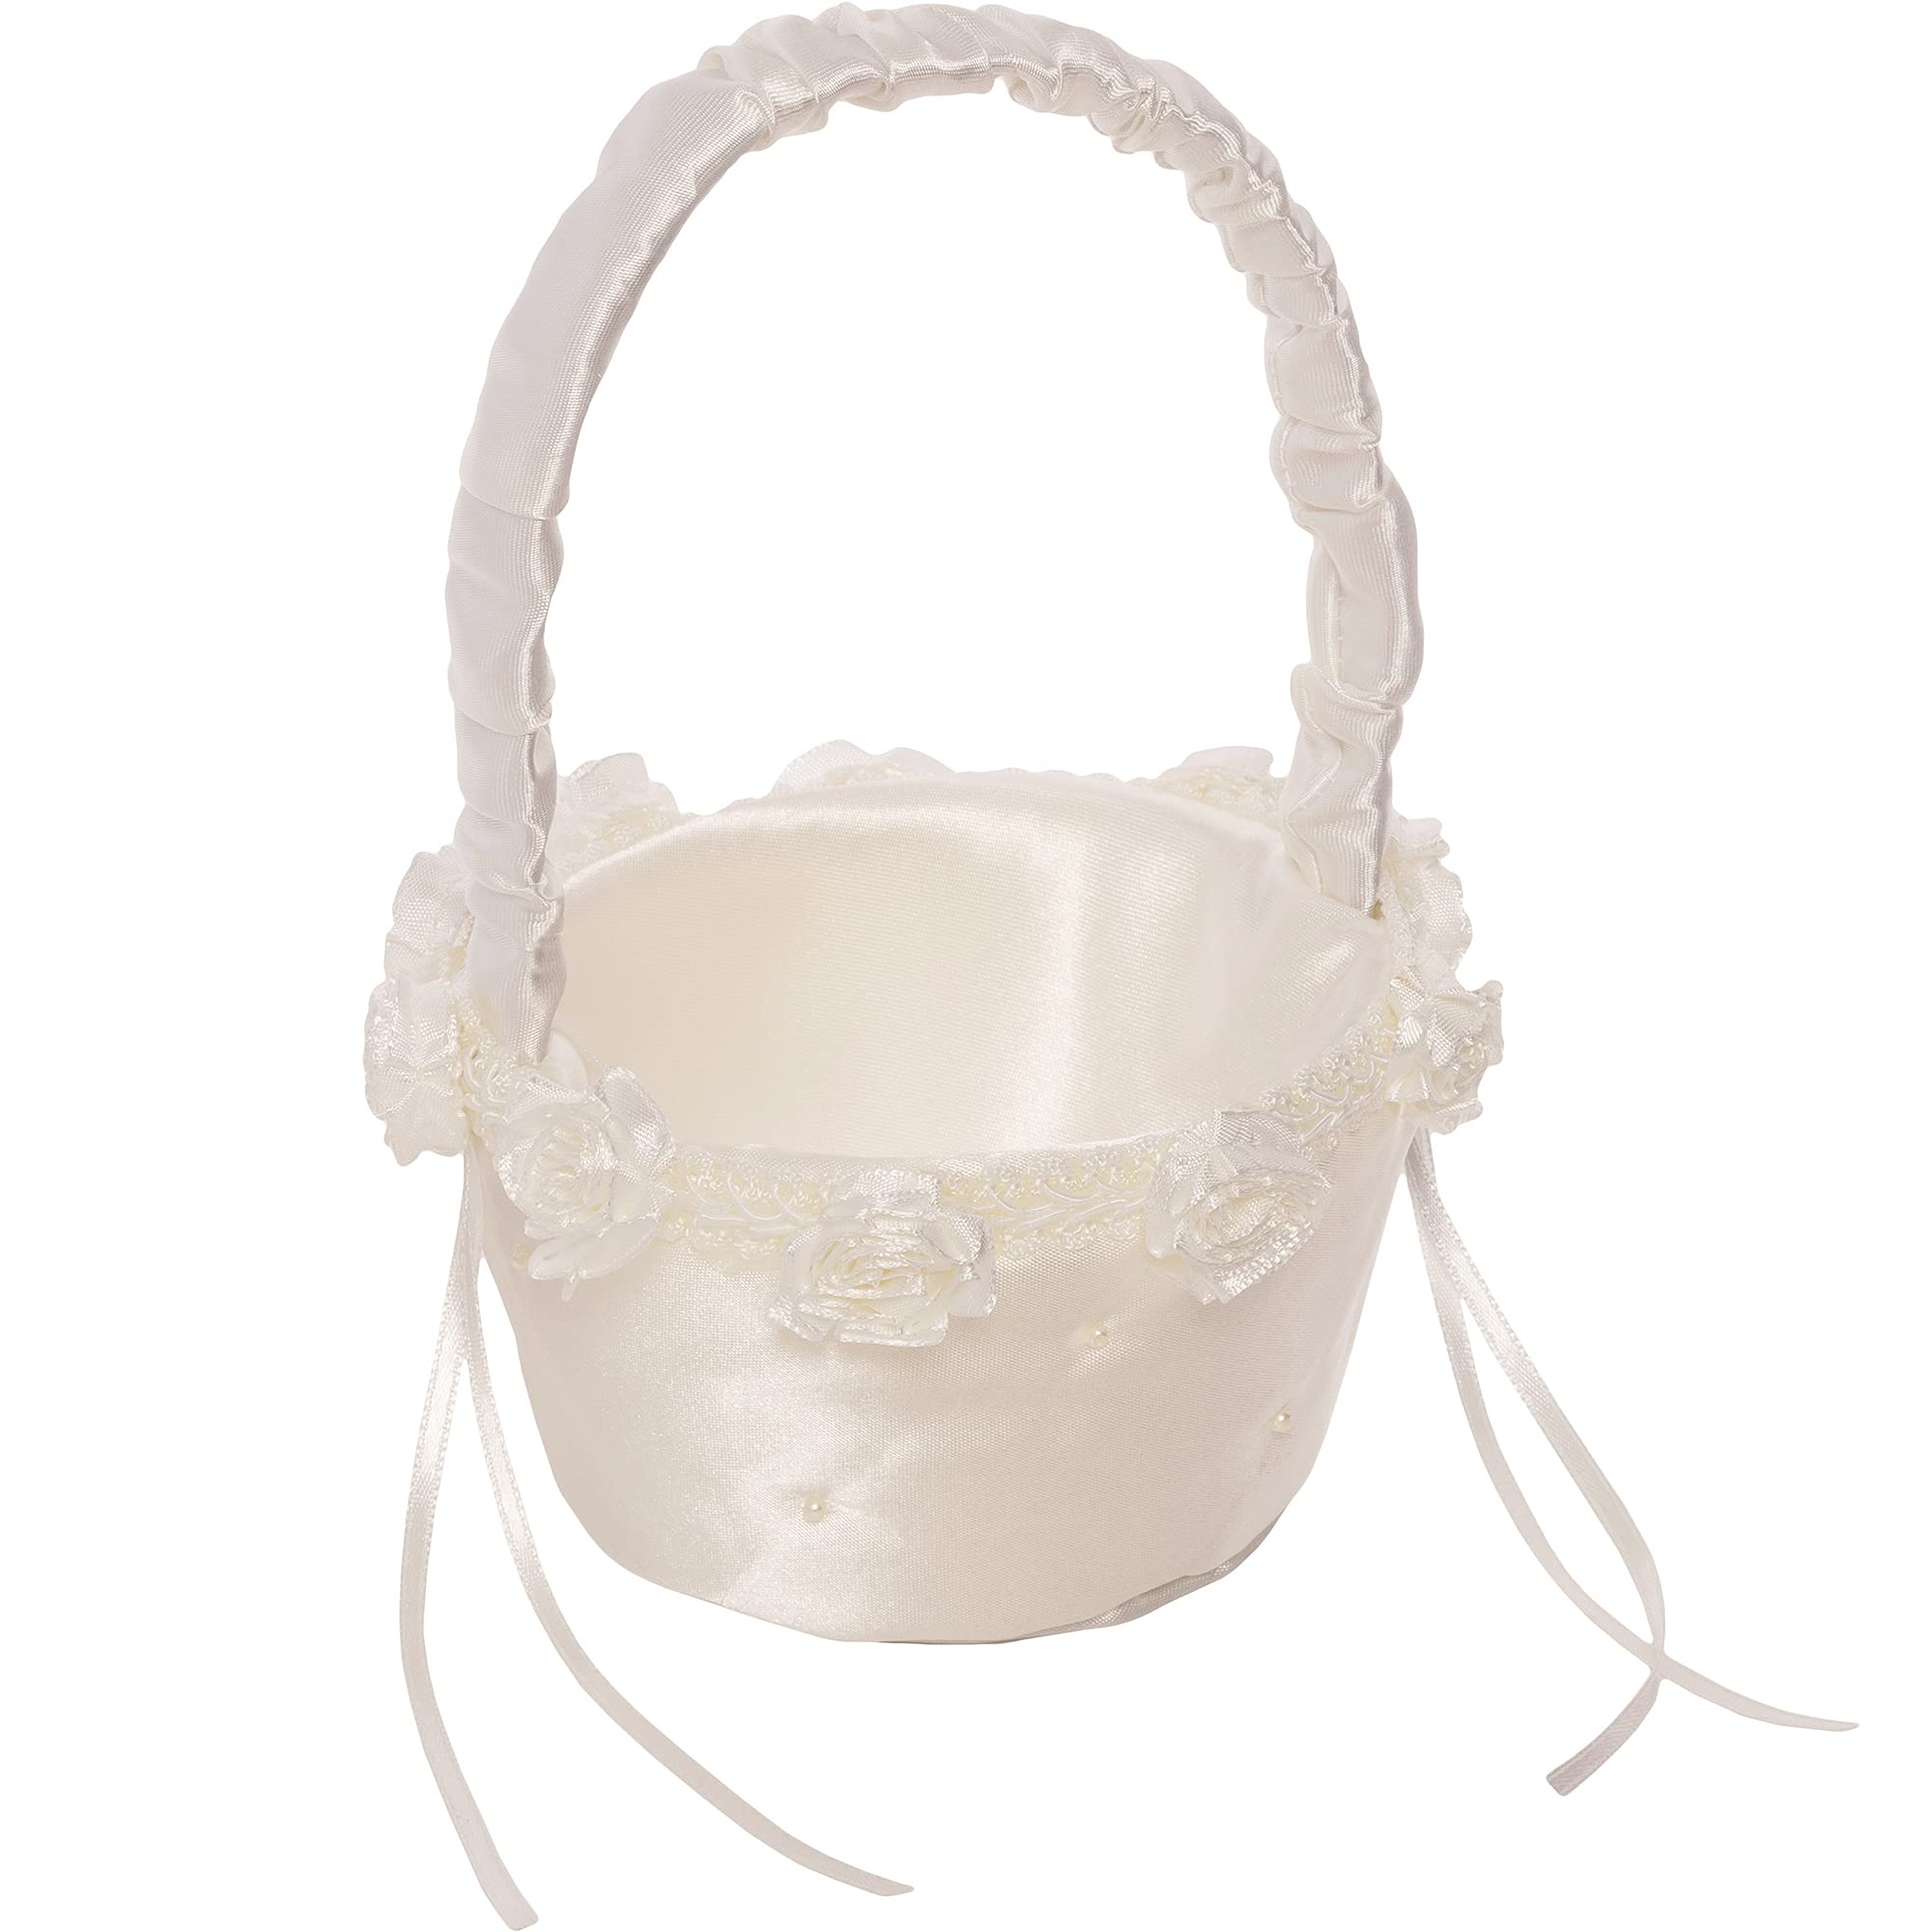 Simplicity 5073062010 Small Flower Girl Basket for Weddings and Other Celebrations, 3.5'' W x 5'' L x 7.5'' H, White Ivory